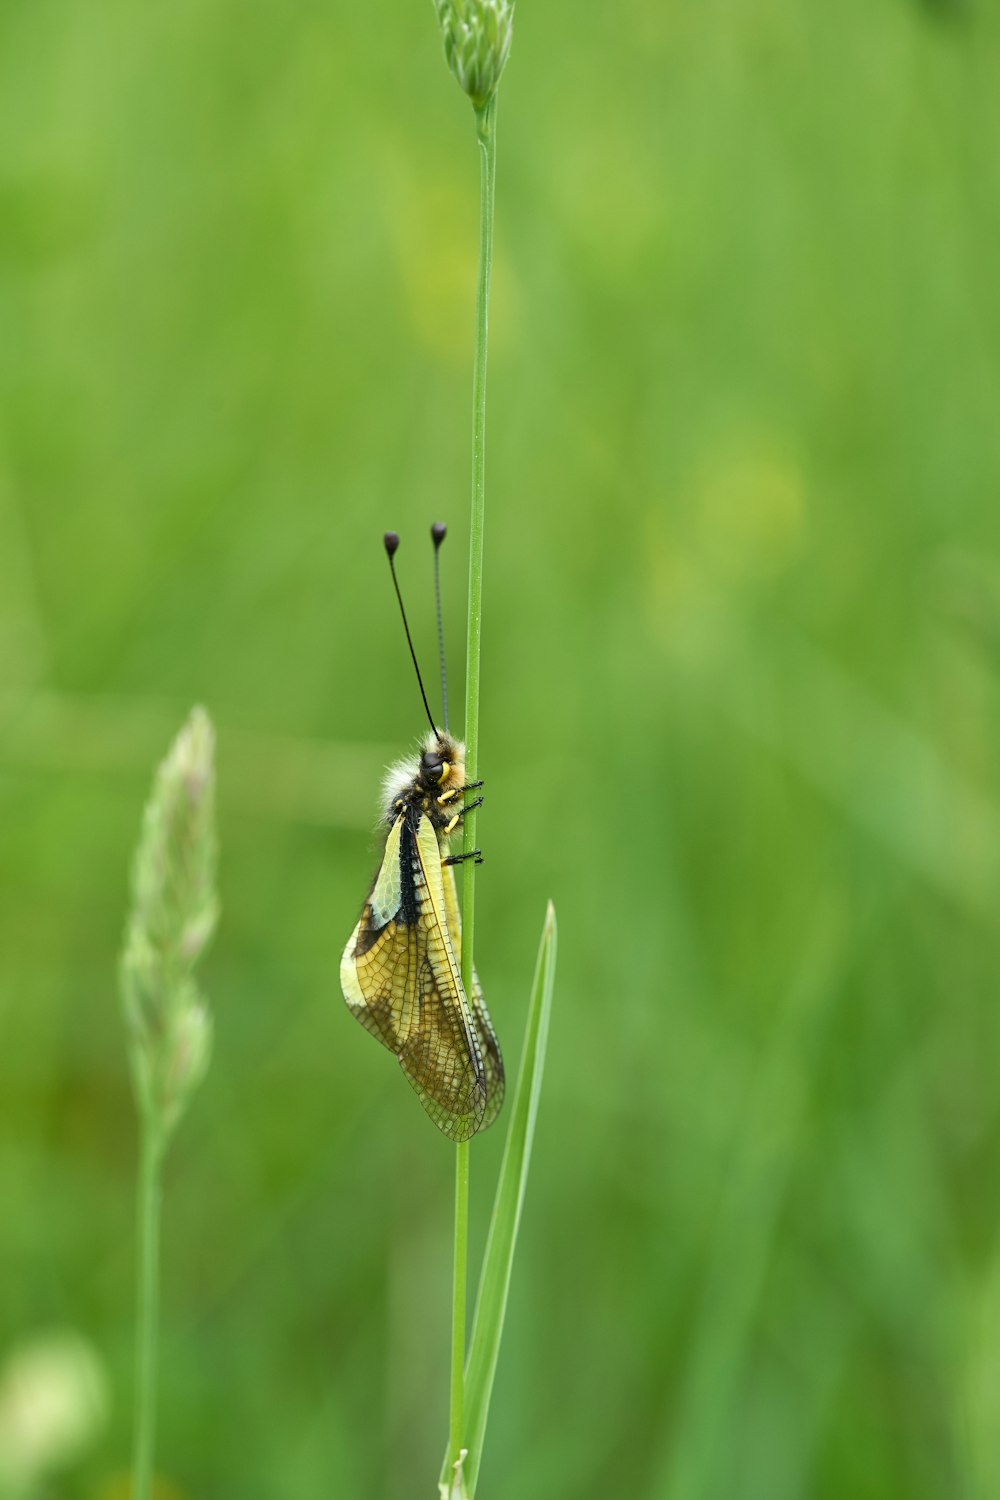 yellow winged insect perching on a green grass